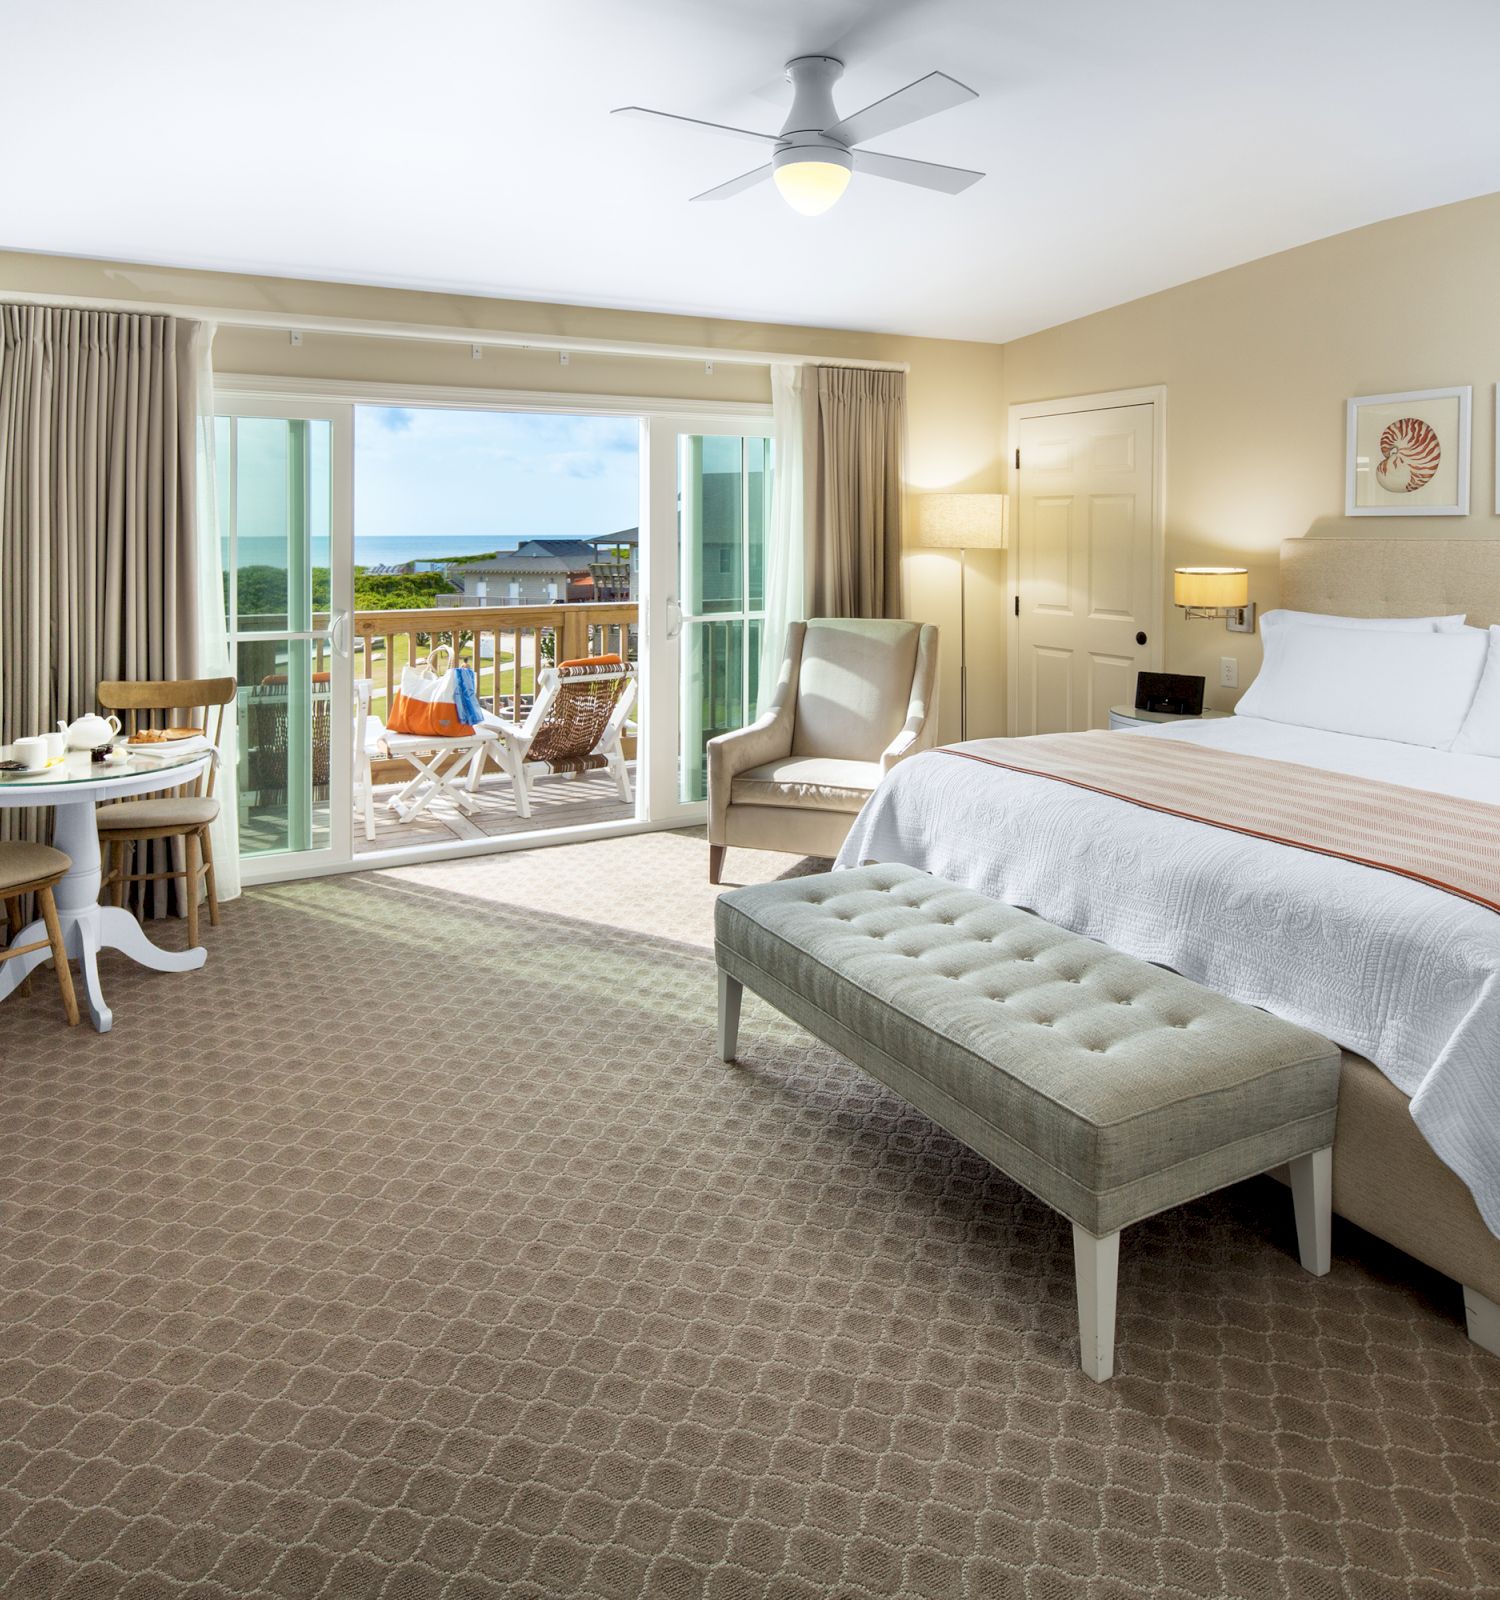 Sanderling Resort's well-lit hotel guest room with a large bed, furniture, and a balcony sunrise view of the Atlantic Ocean.